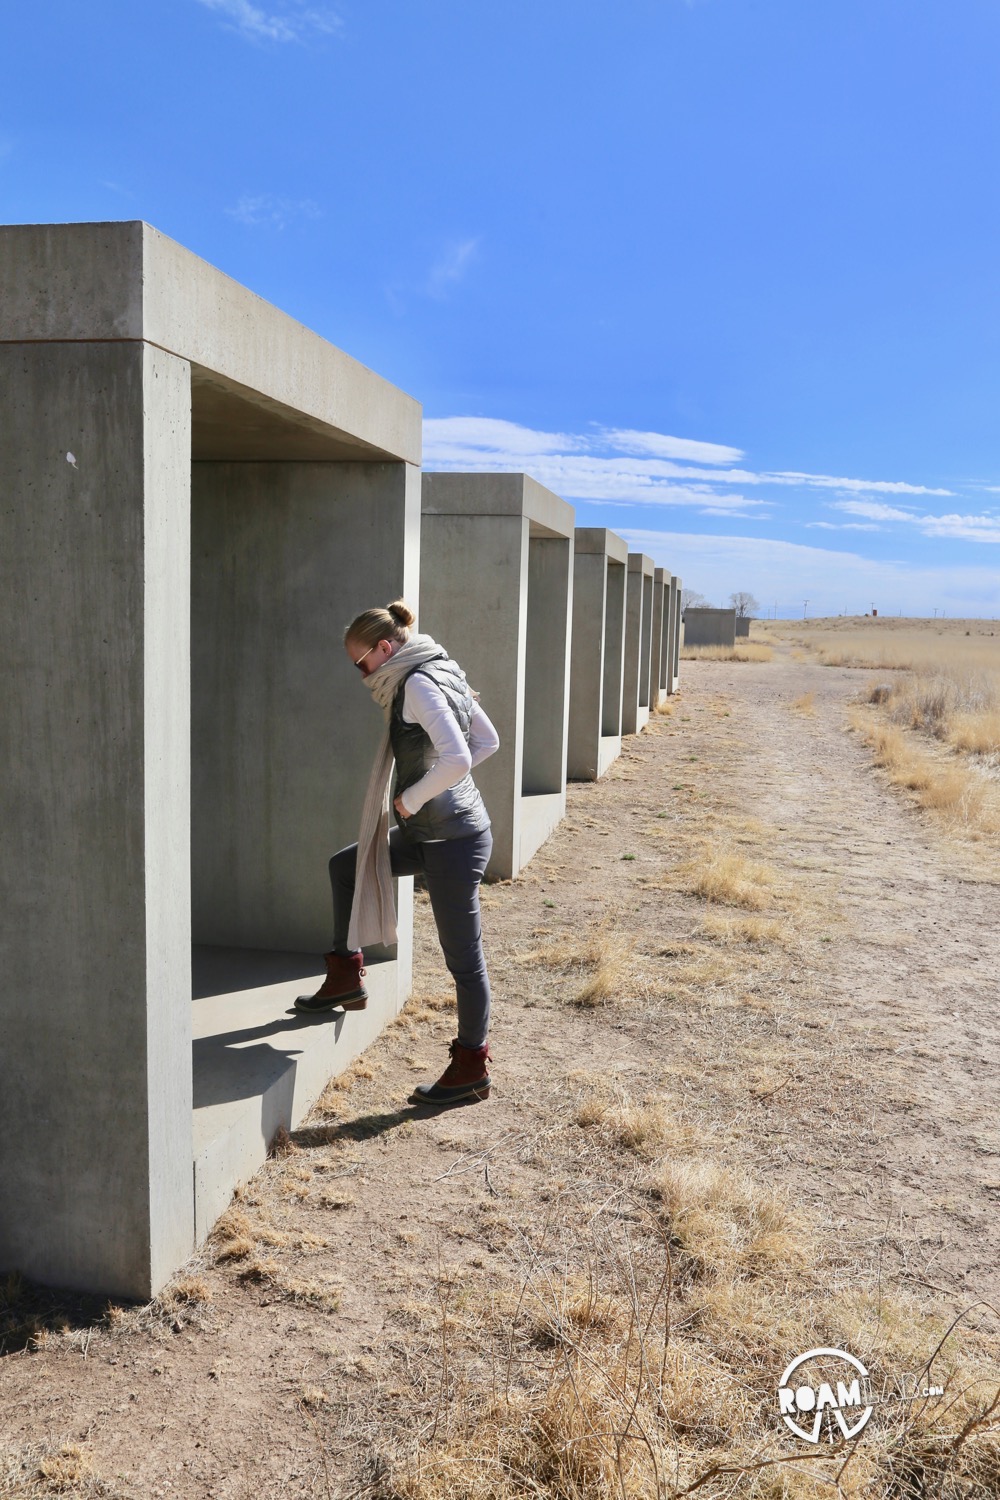 Exploring a collection of concrete sculptures by Donald Judd outside the Chinati Foundation.